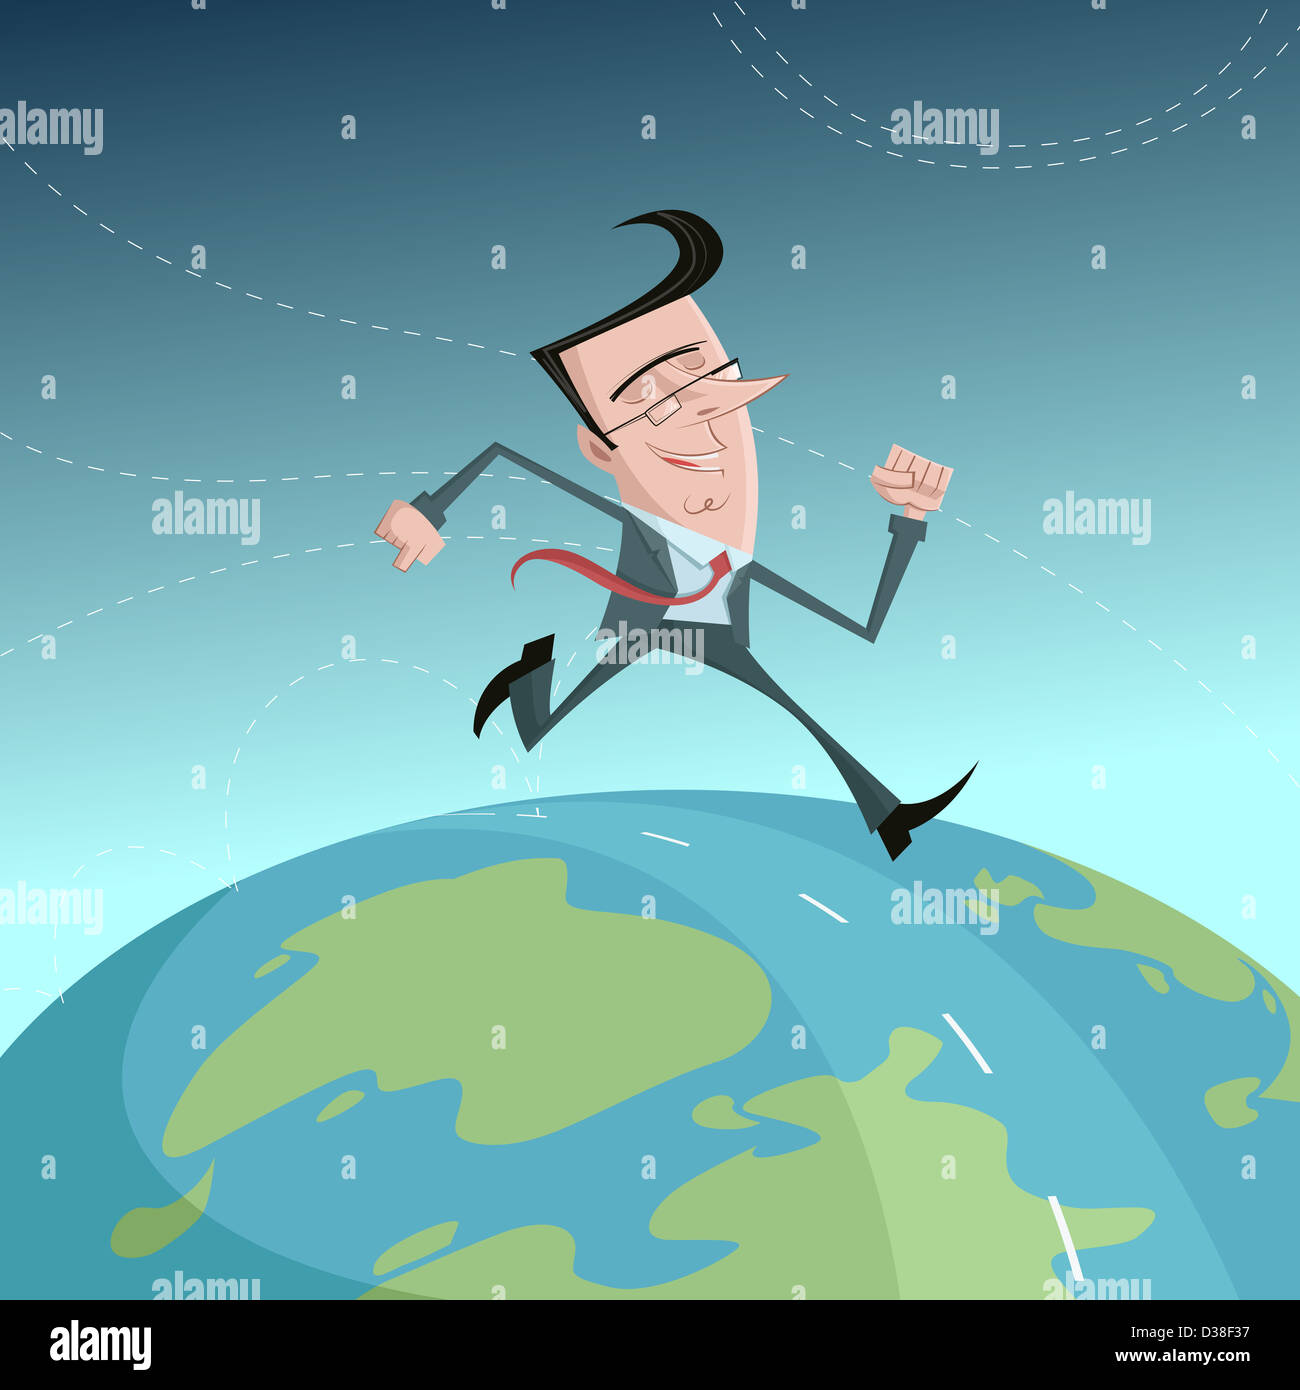 Illustrative image of happy businessman running across the world representing globalization Stock Photo